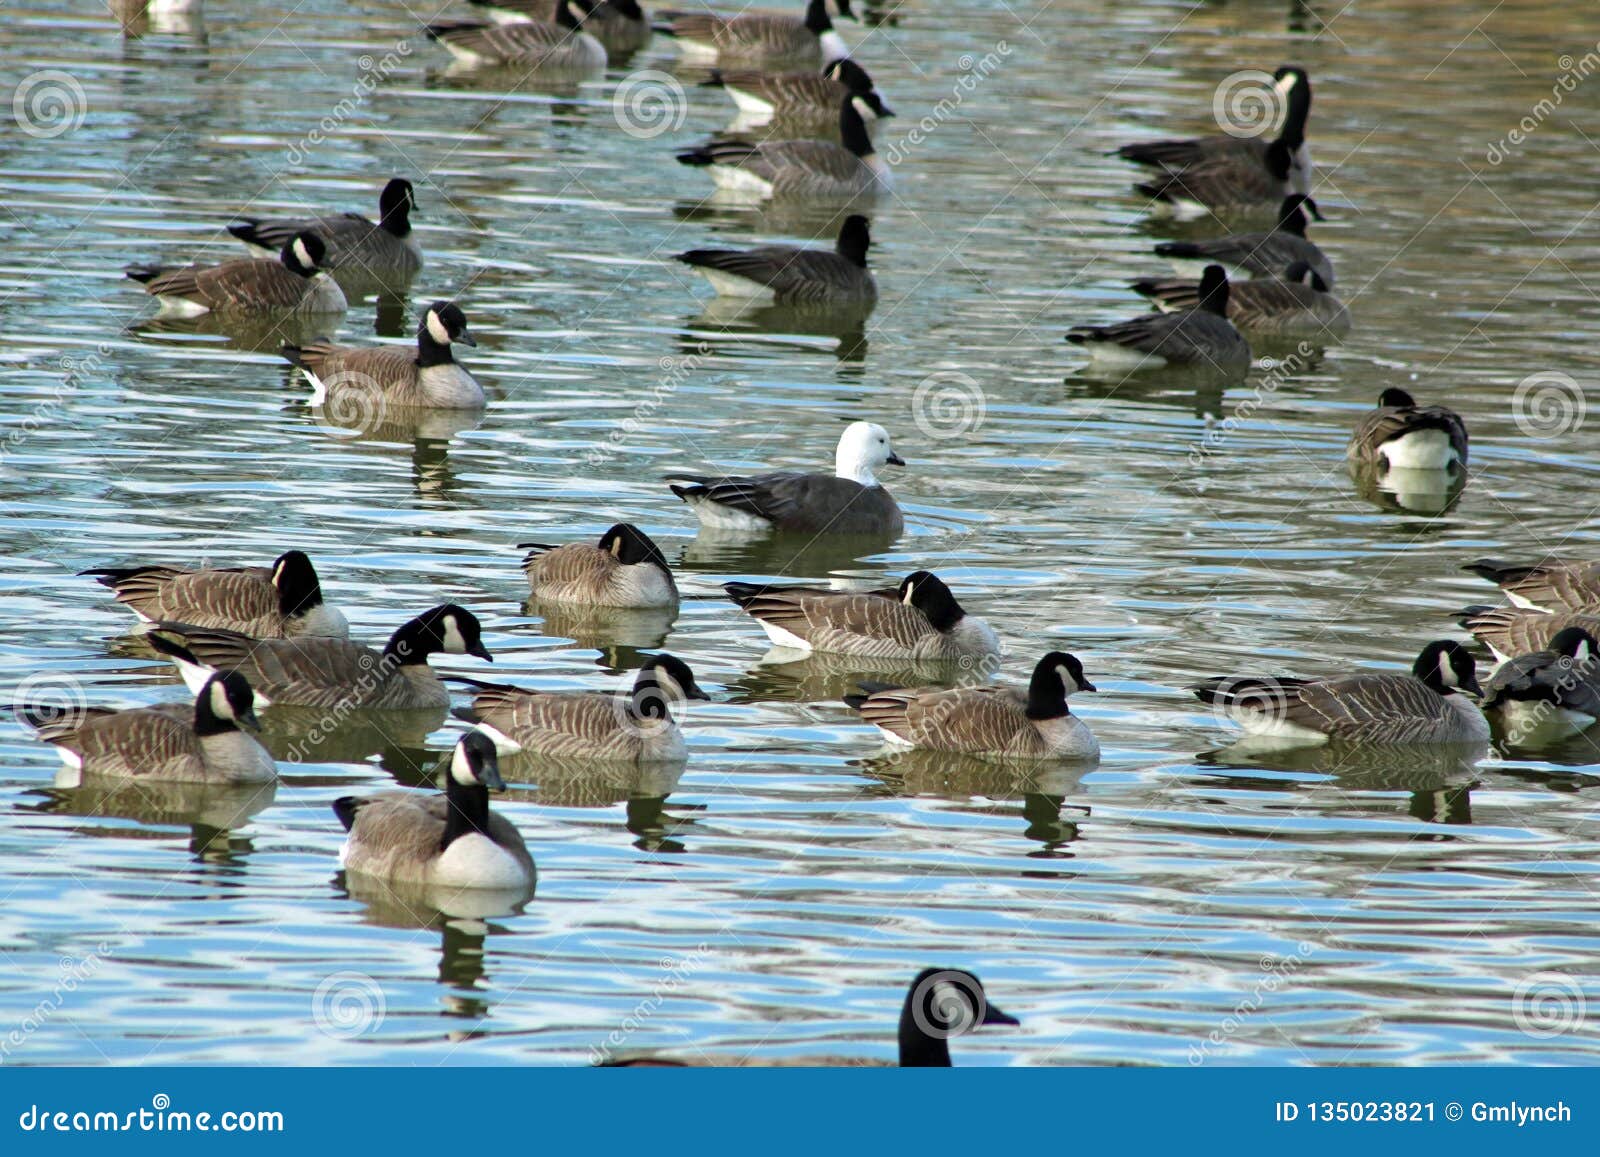 snow goose anser caerulescens adult blue morph swimming with canada geese urban lake canyon texas central flyway